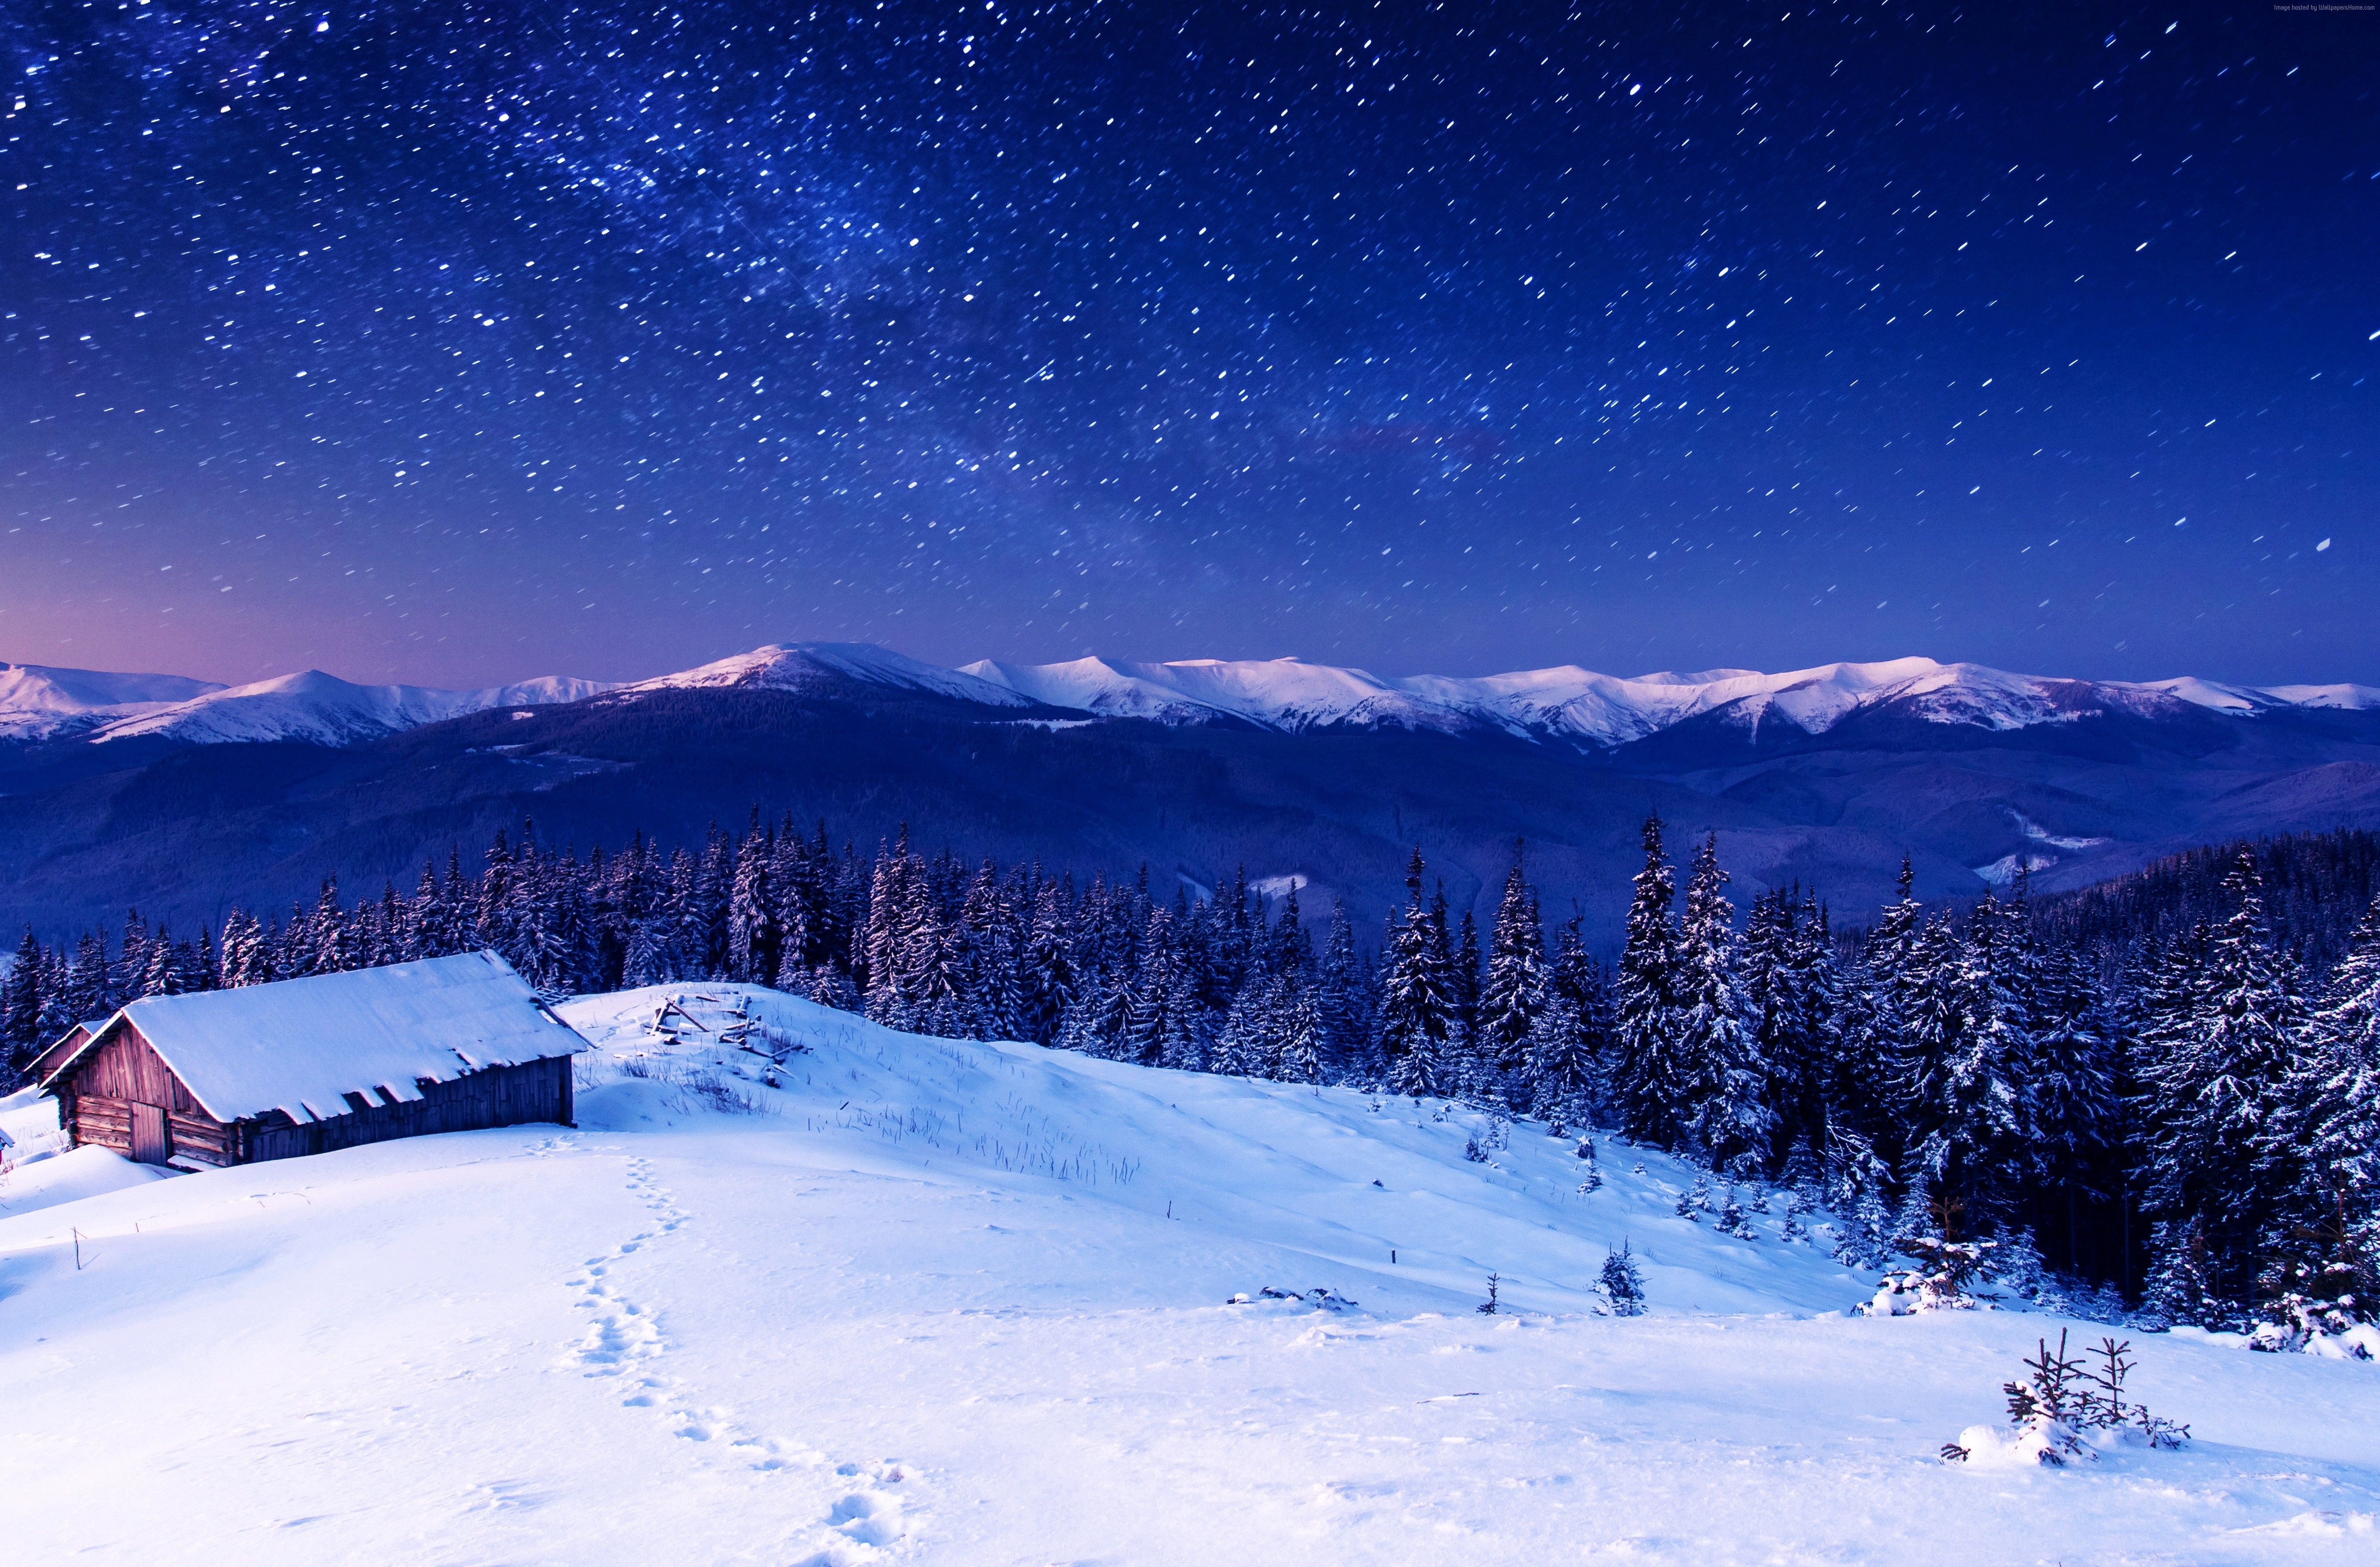 Night Snow Pictures  Download Free Images on Unsplash